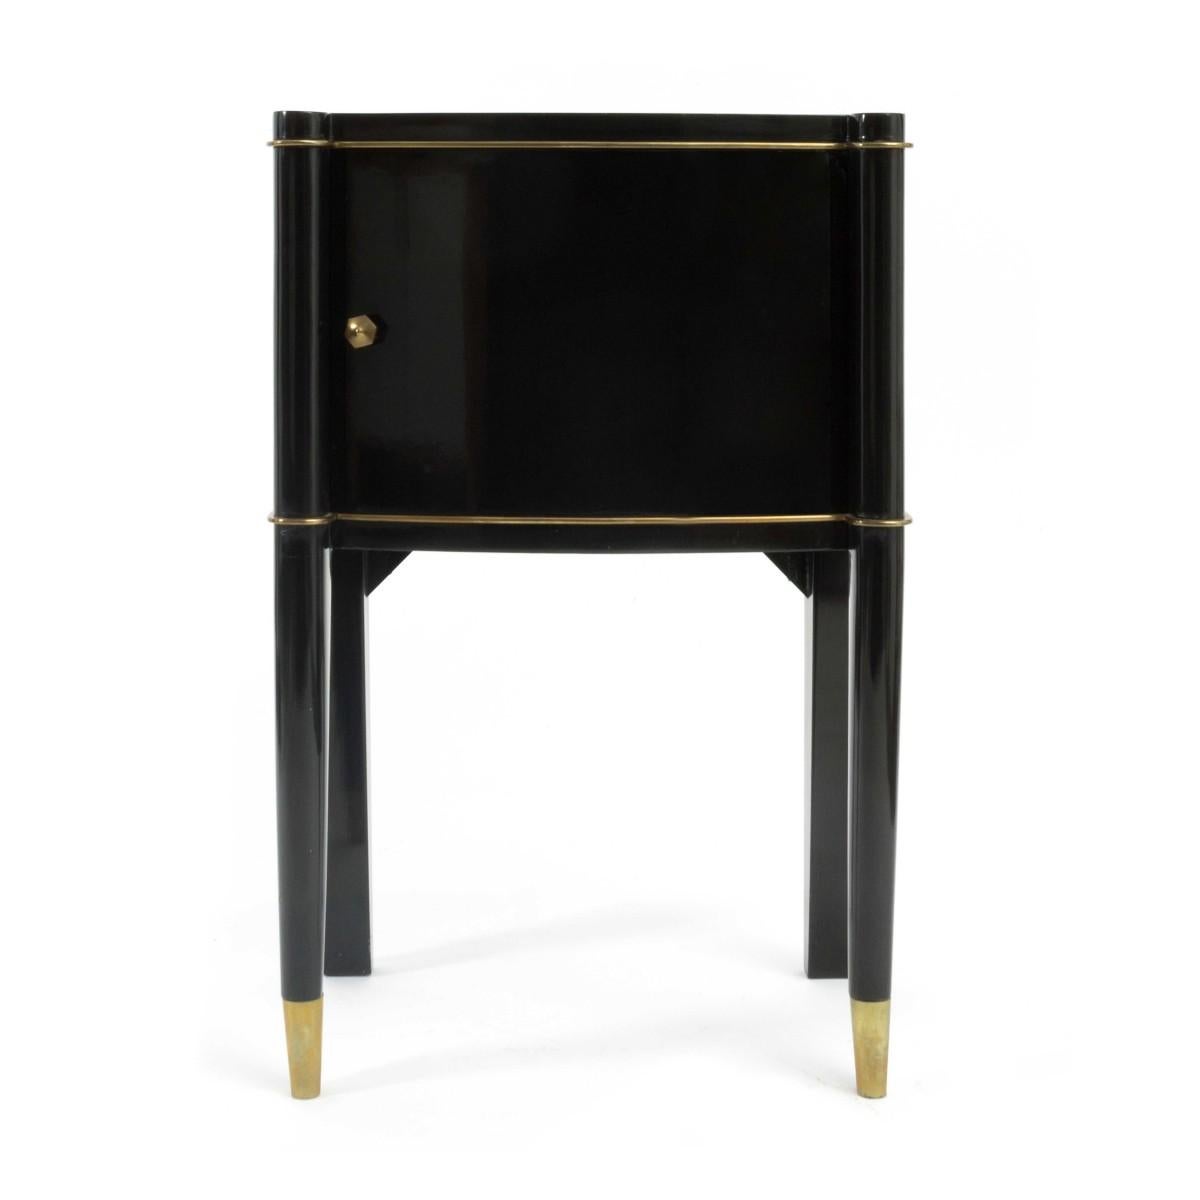 A pair of Art Deco nightstands with single right and left opening doors by De Coene Frères. Made in the 1930s in Brussels, Belgium. Signed with original label.

Featuring a black lacquer finish, sycamore interior, bronze details, sabots and center